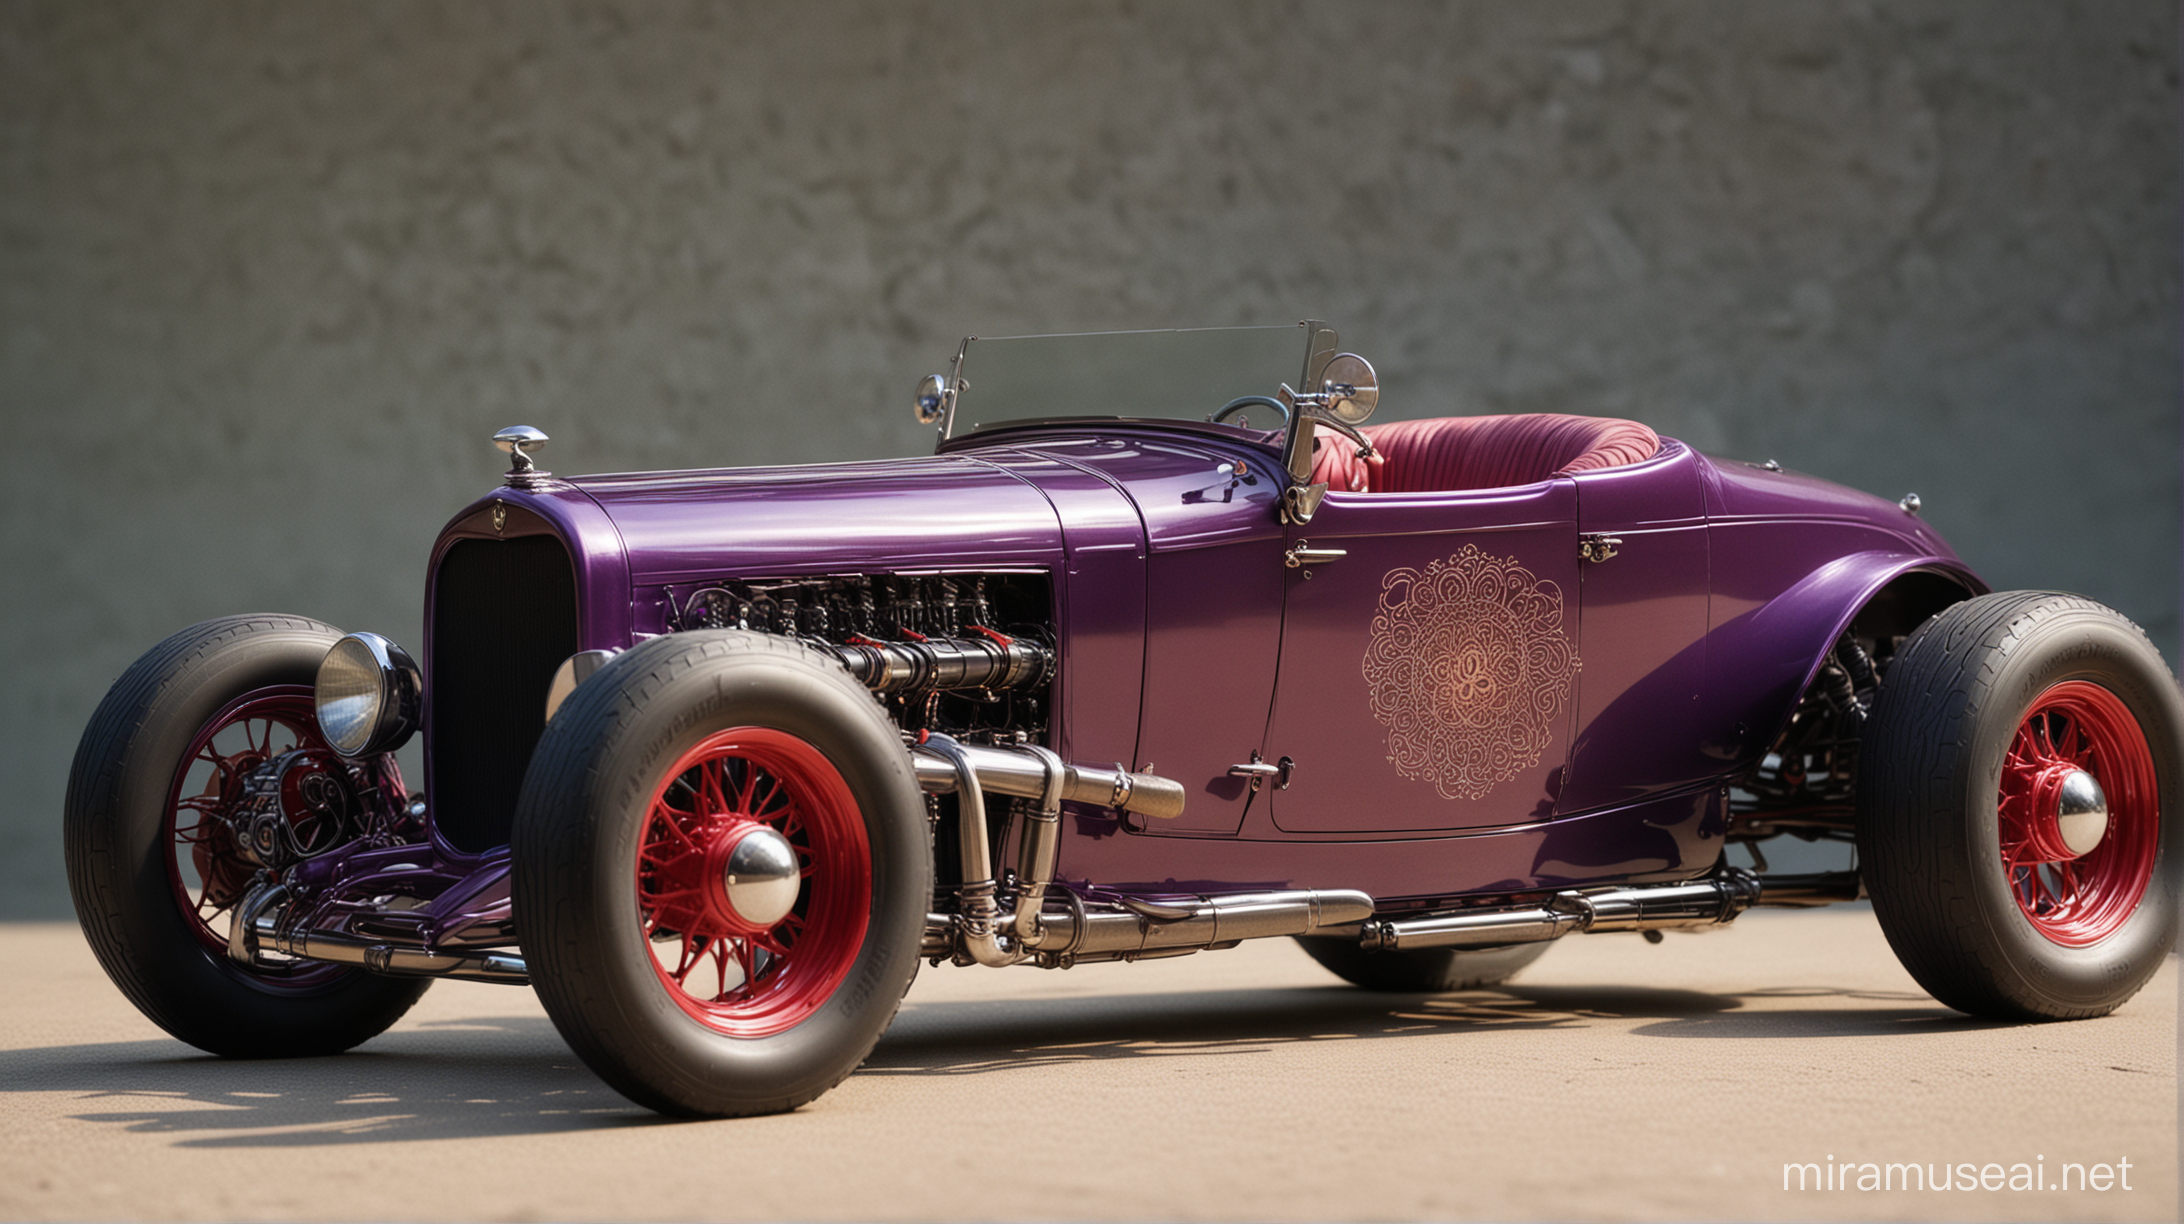 Exquisite 1925 Custom Coupe with Red to Purple Pearl Paint and SilkClad Future Love Doll